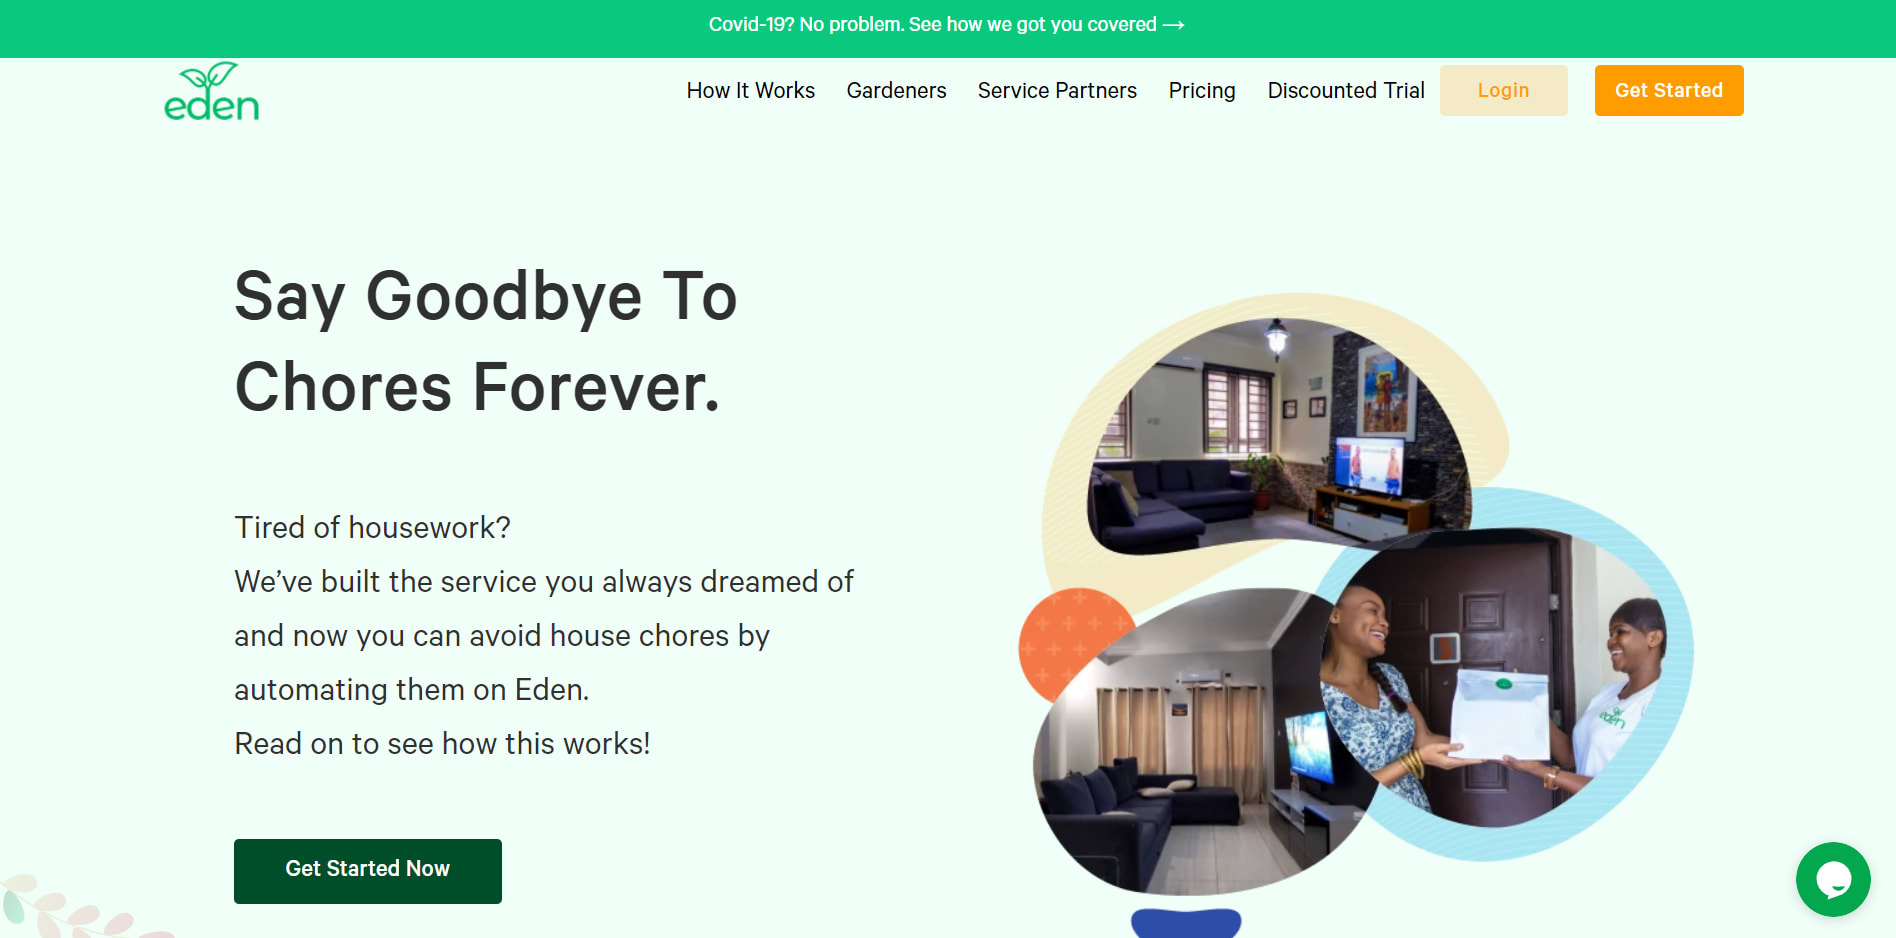 5 Recent Nigerian Real Estate Startup's helping with easier living